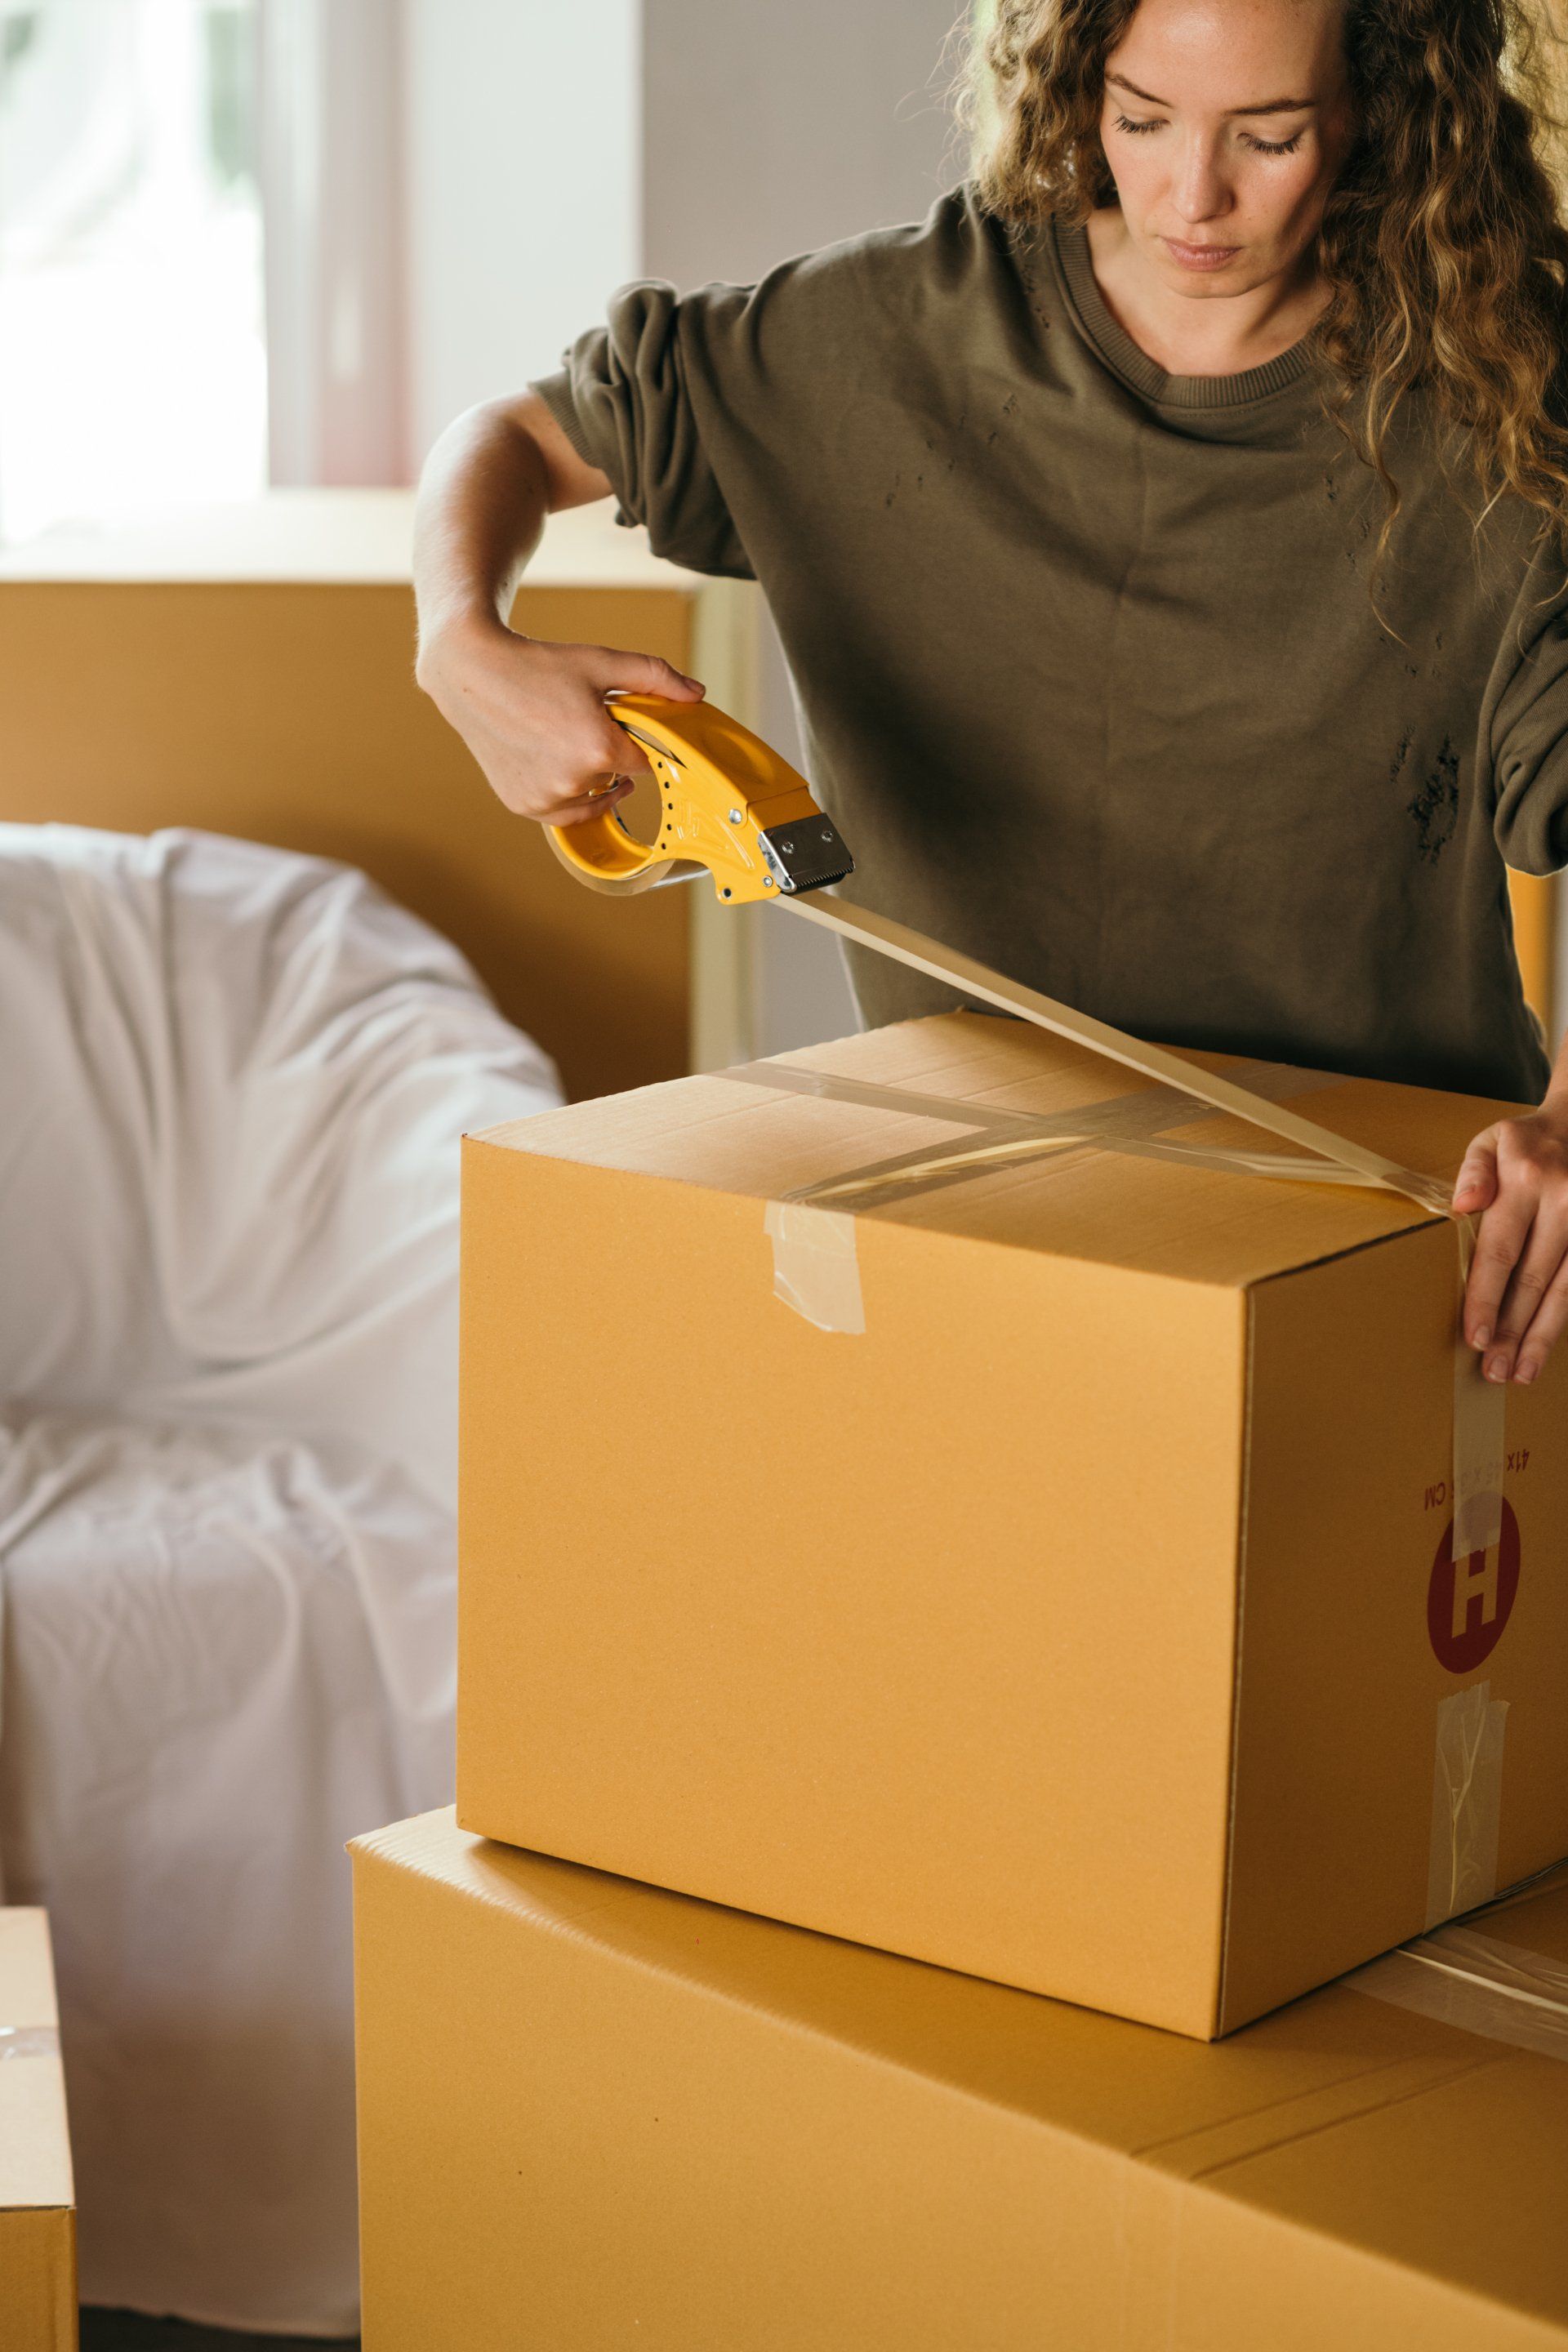 A woman carefully arranging items into cardboard boxes, preparing for a move to a new location.